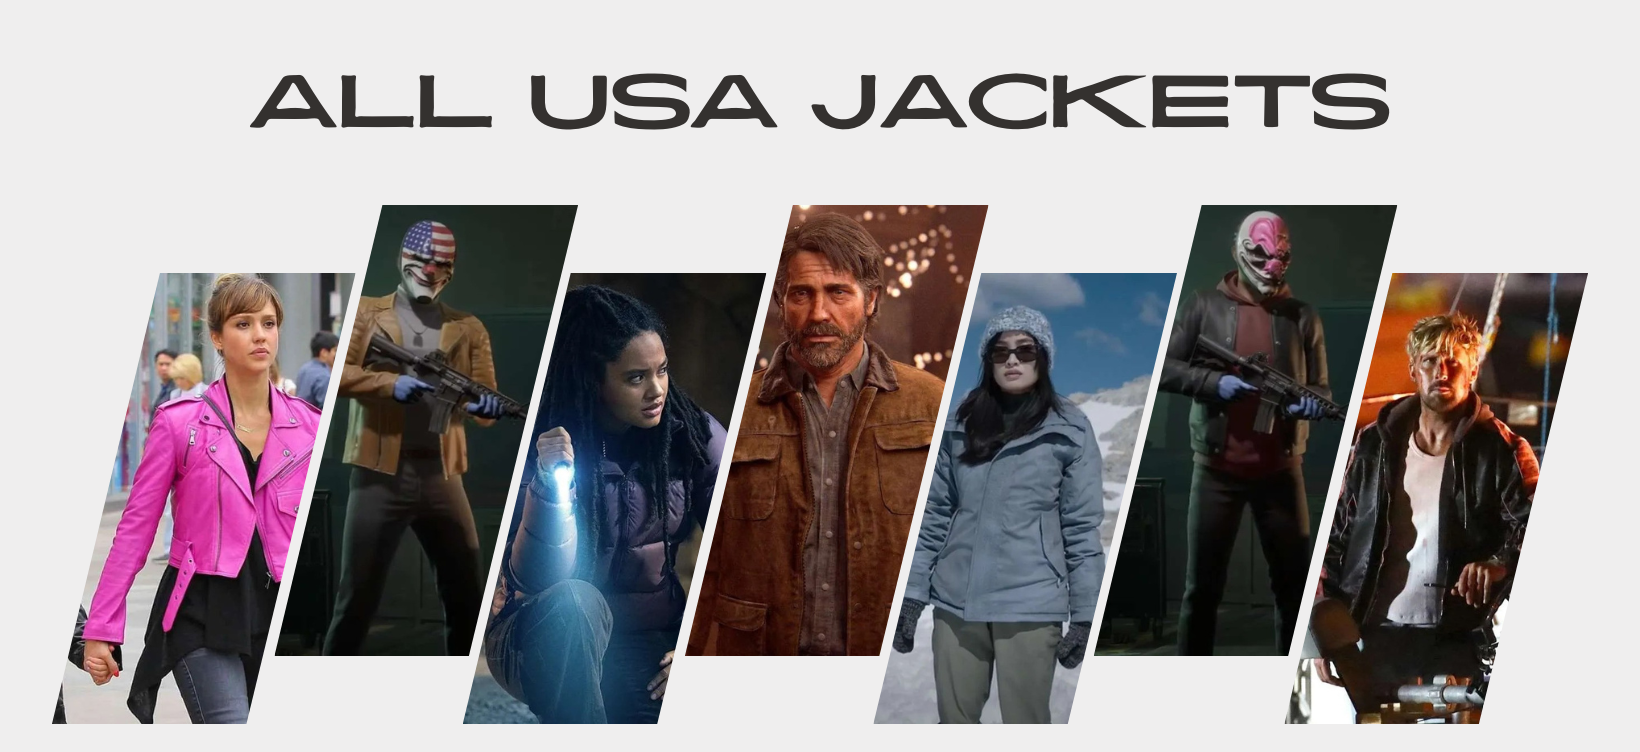 All USA Jackets Cover